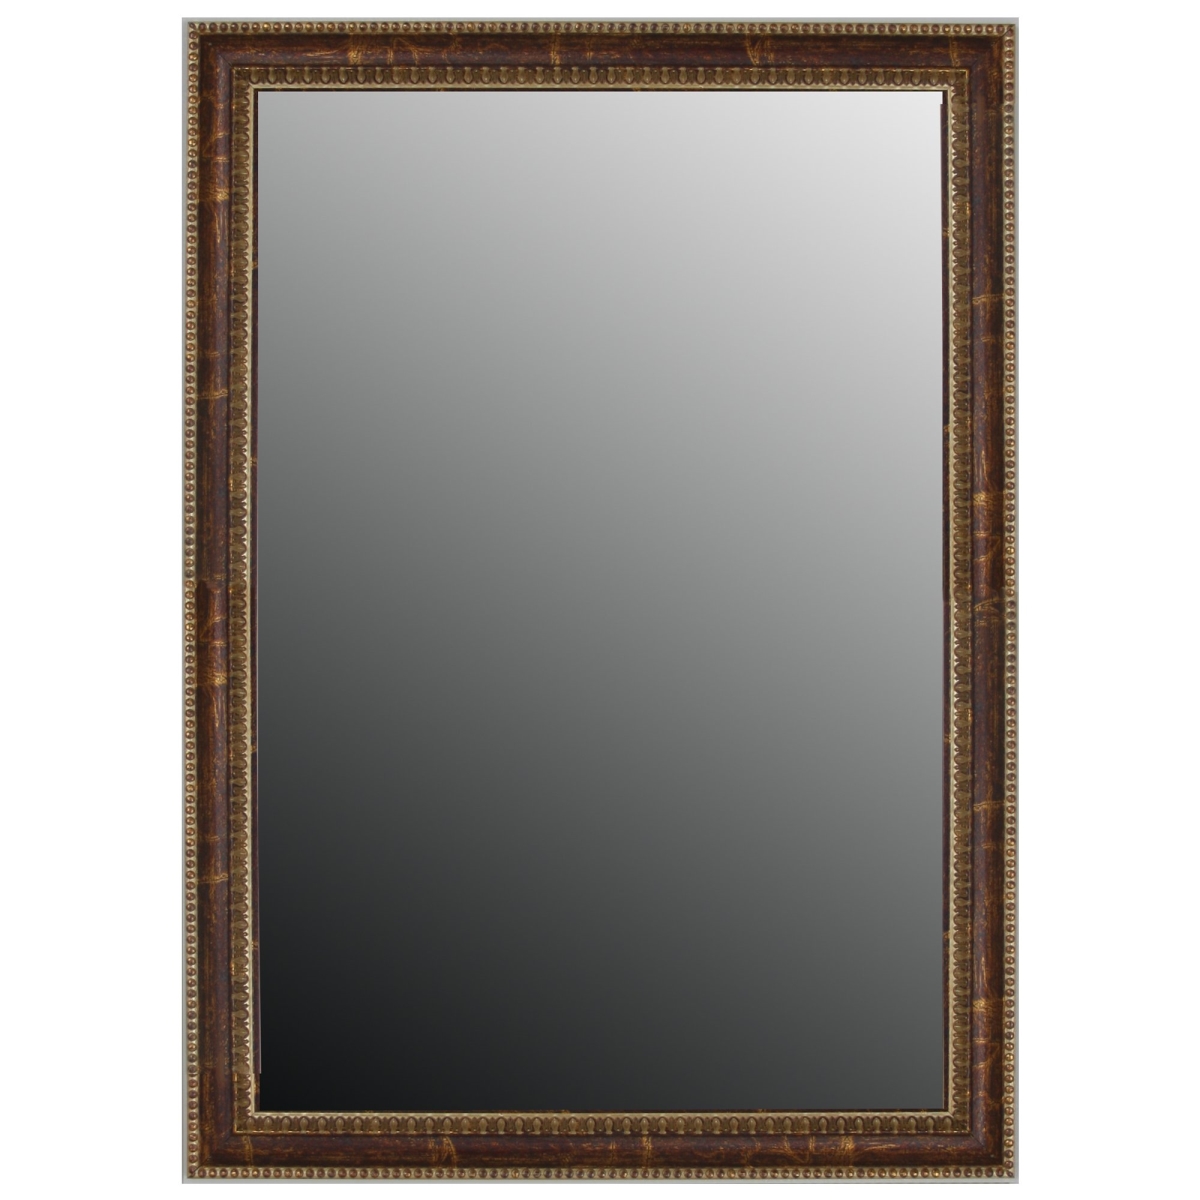 Hitchcock Butterfield 808801 Gold Georgian V Beaded Wall Mirror - 22.25 X 58.25 In.